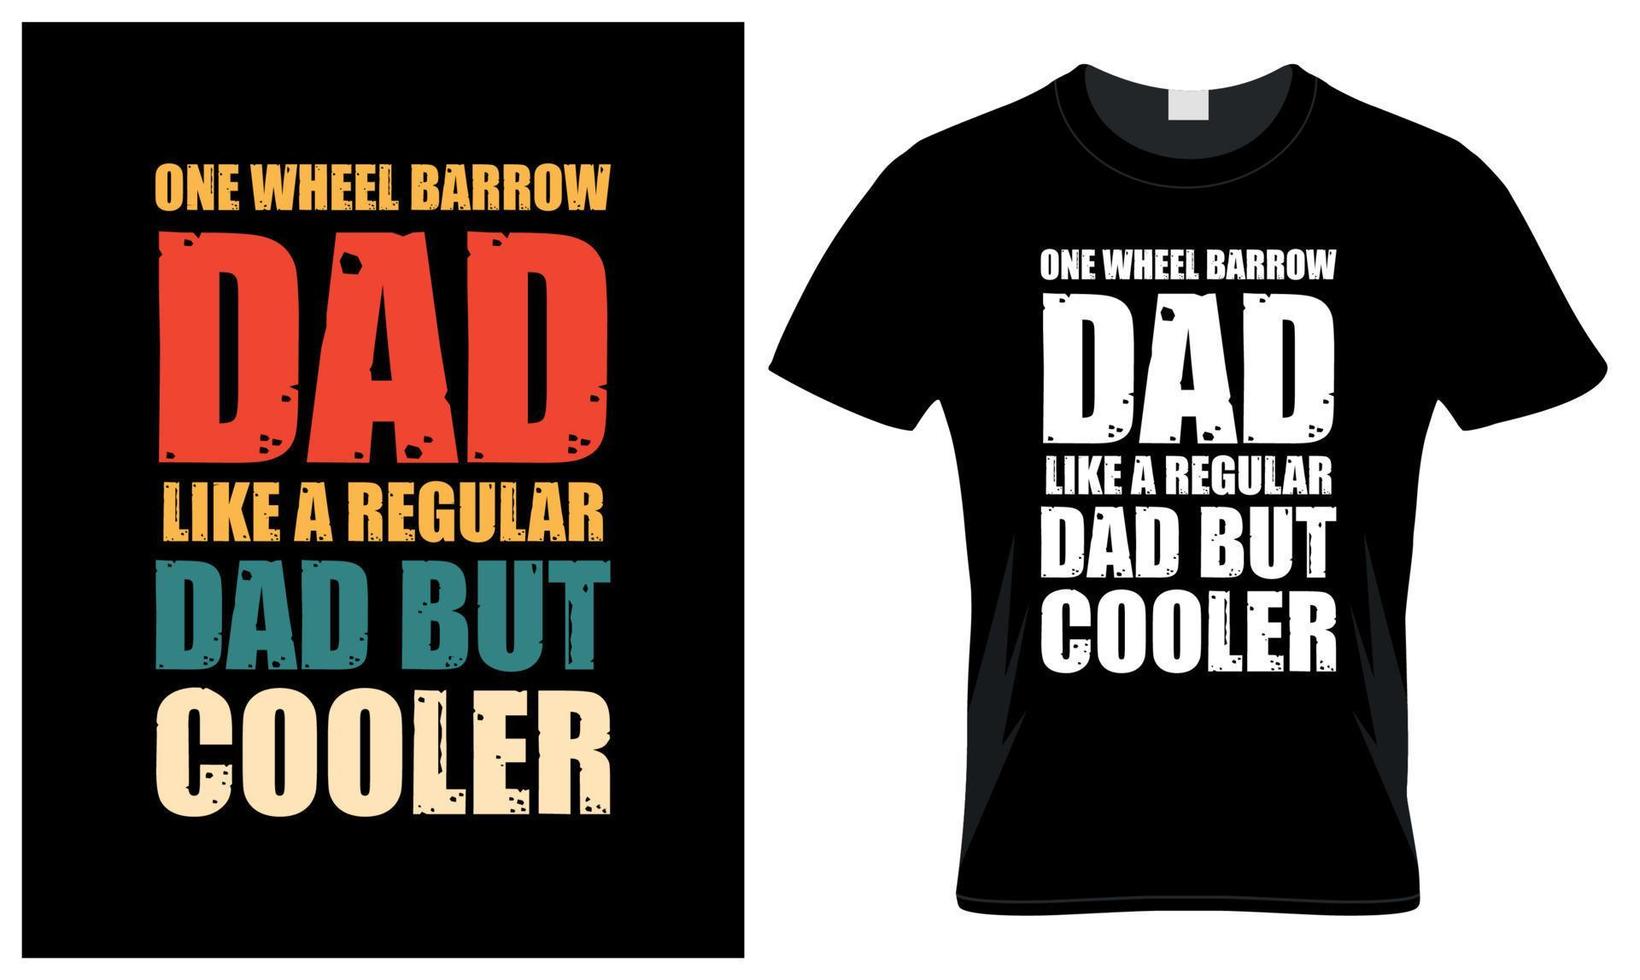 One wheel barrow dad lover father's day vintage t-shirt design vector